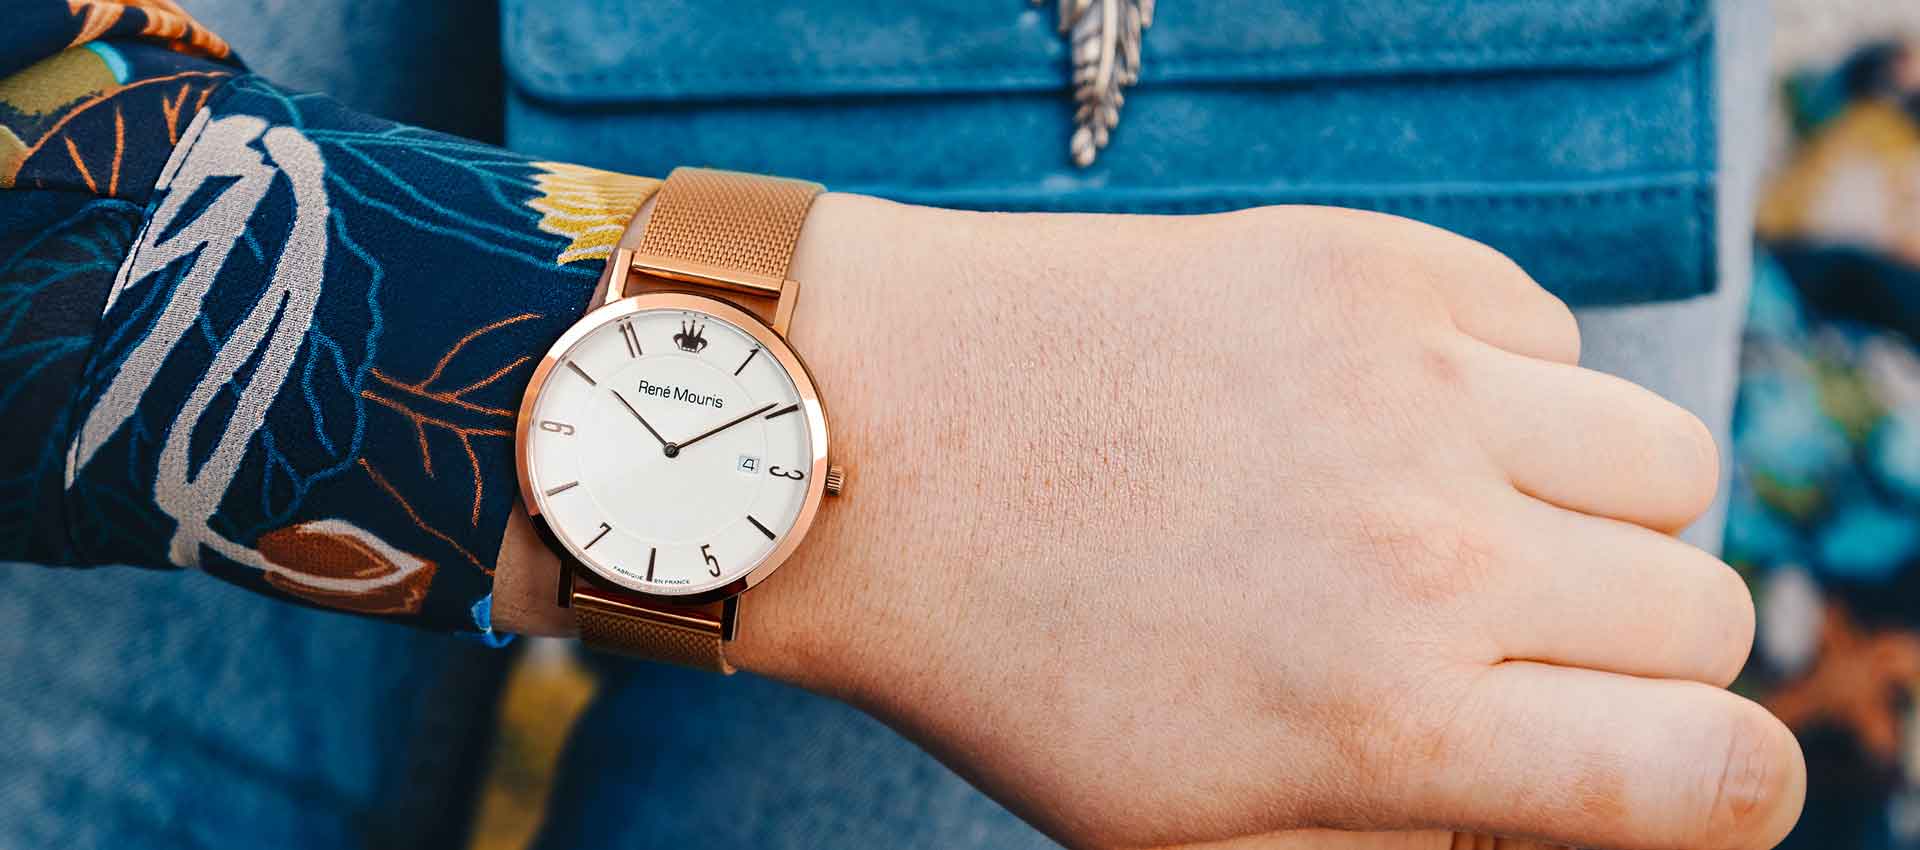 trendy watches | fashion watches